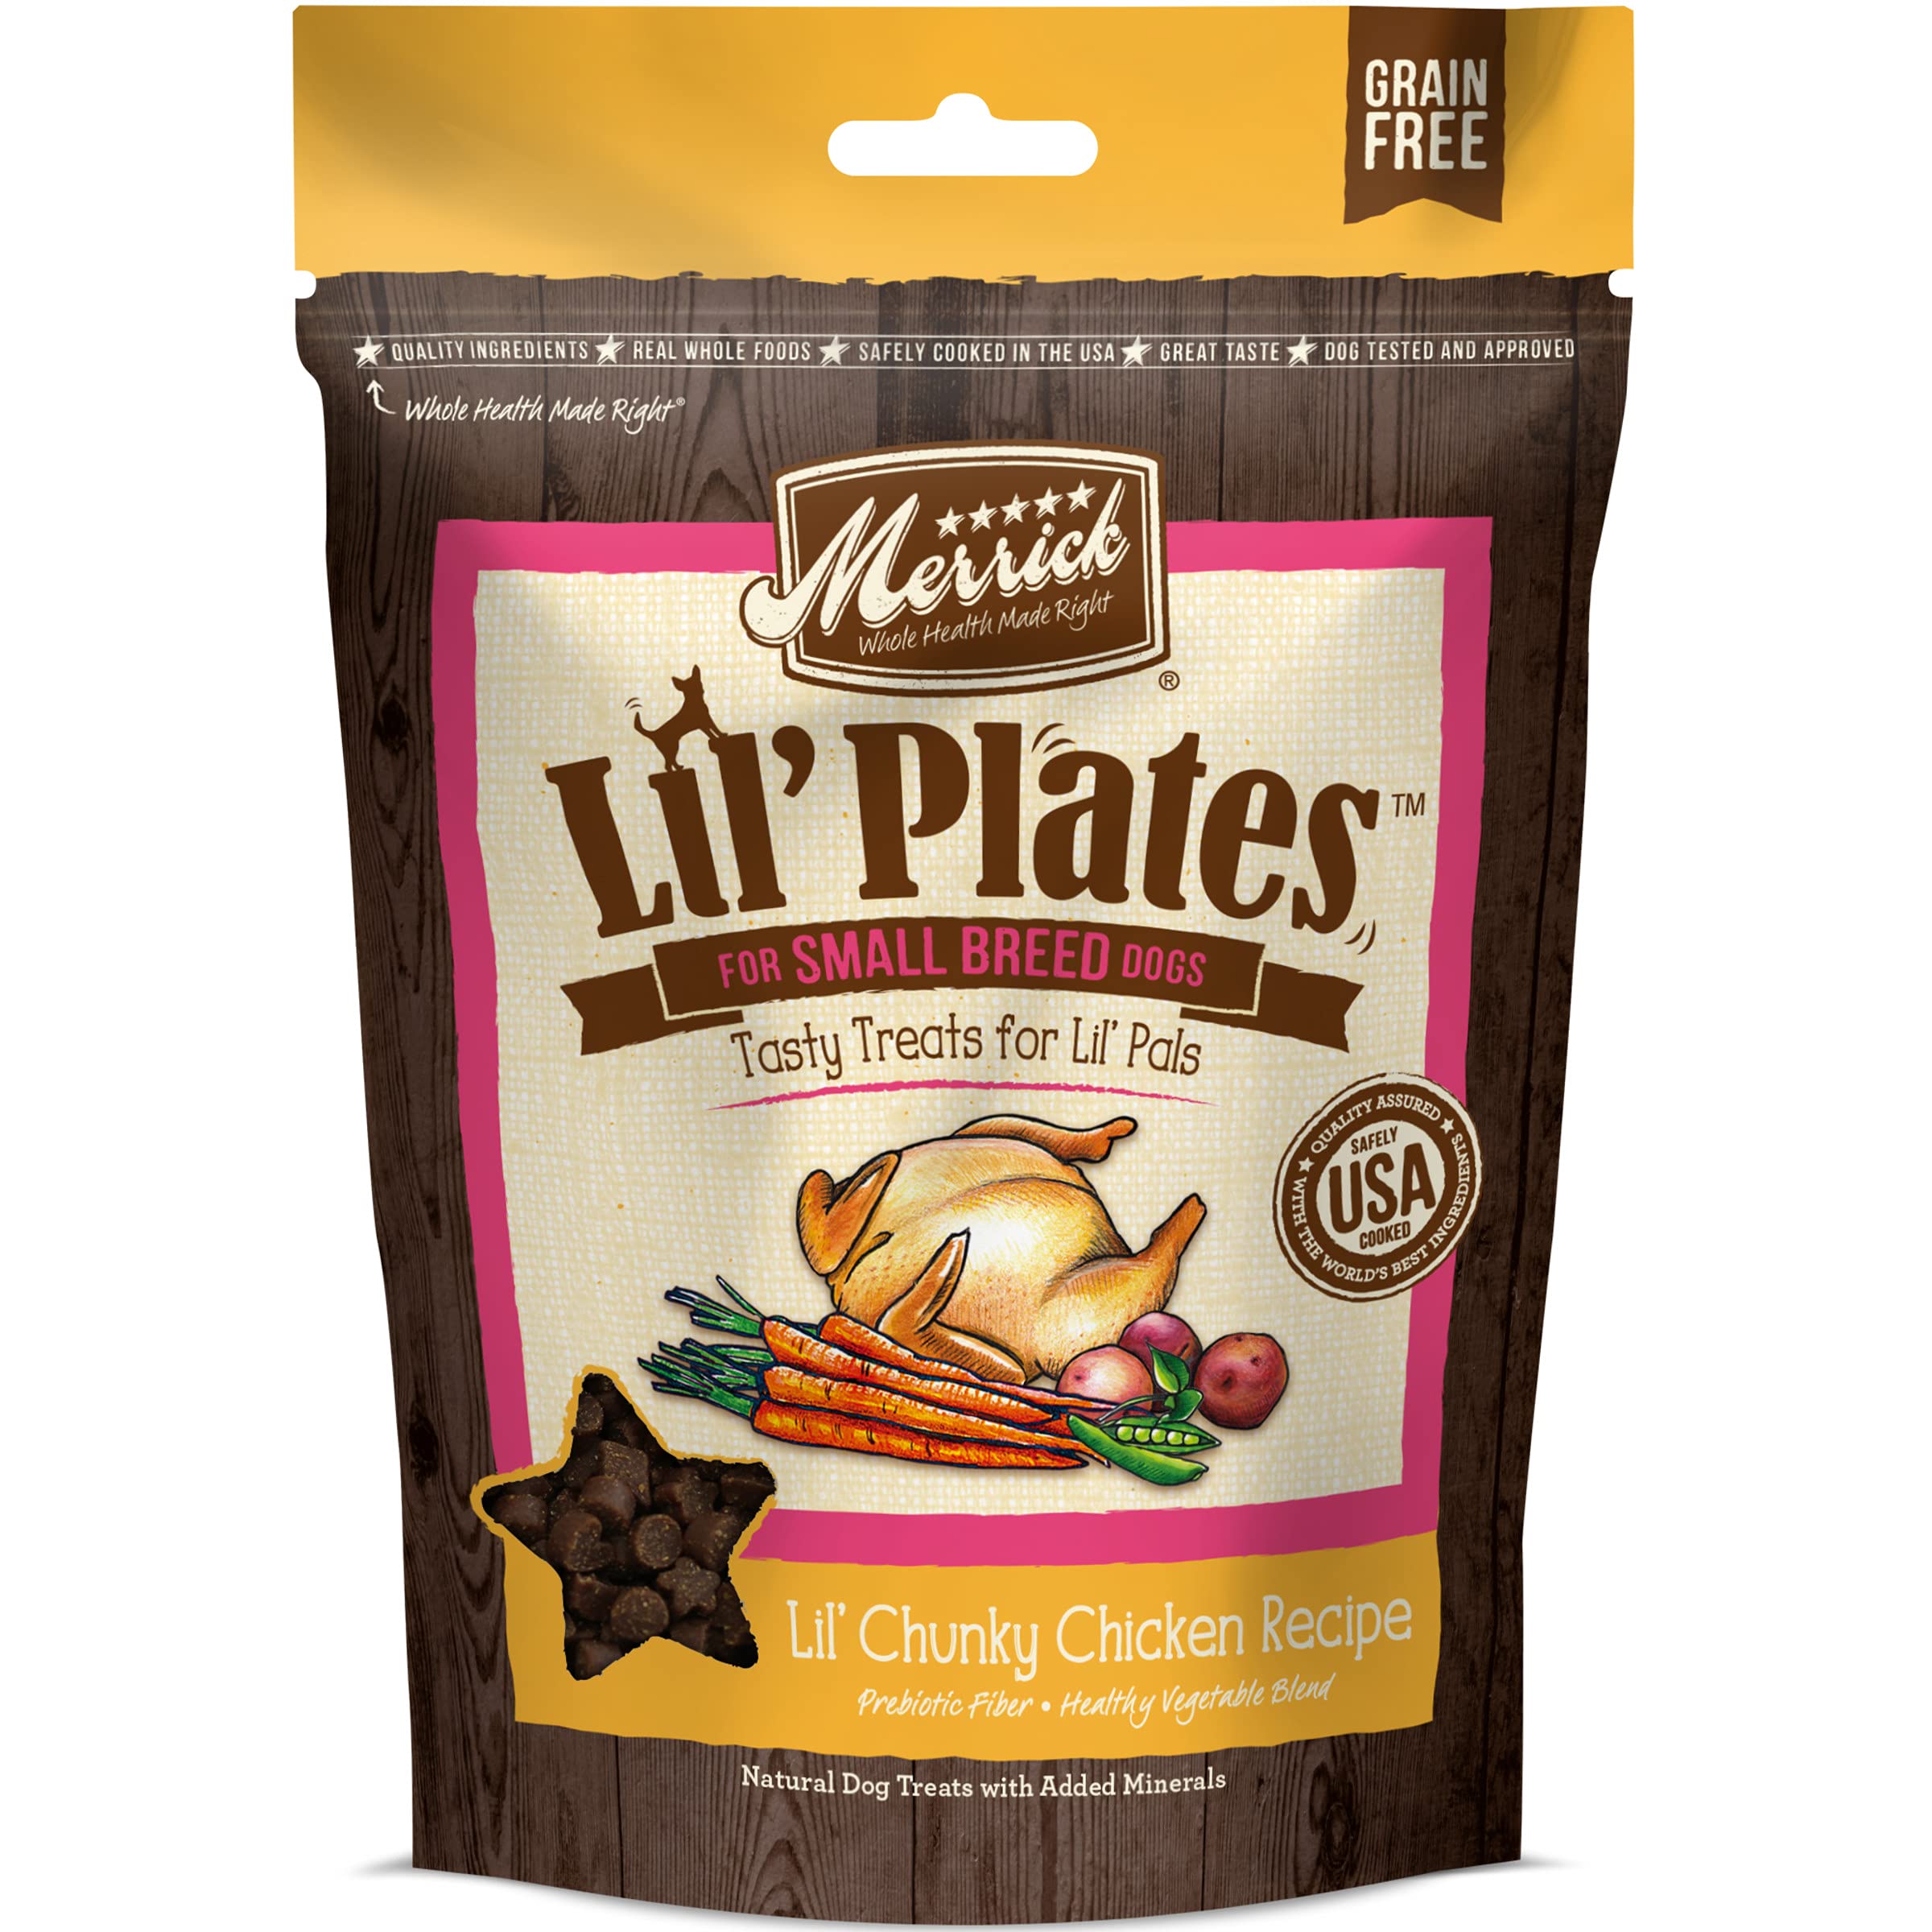 5-Oz Merrick Lil' Plates Lil' Chunky Grain Free Small Breed Dog Treats (Chicken) $2.18 w/ S&S + Free Shipping w/ Prime or on $35+